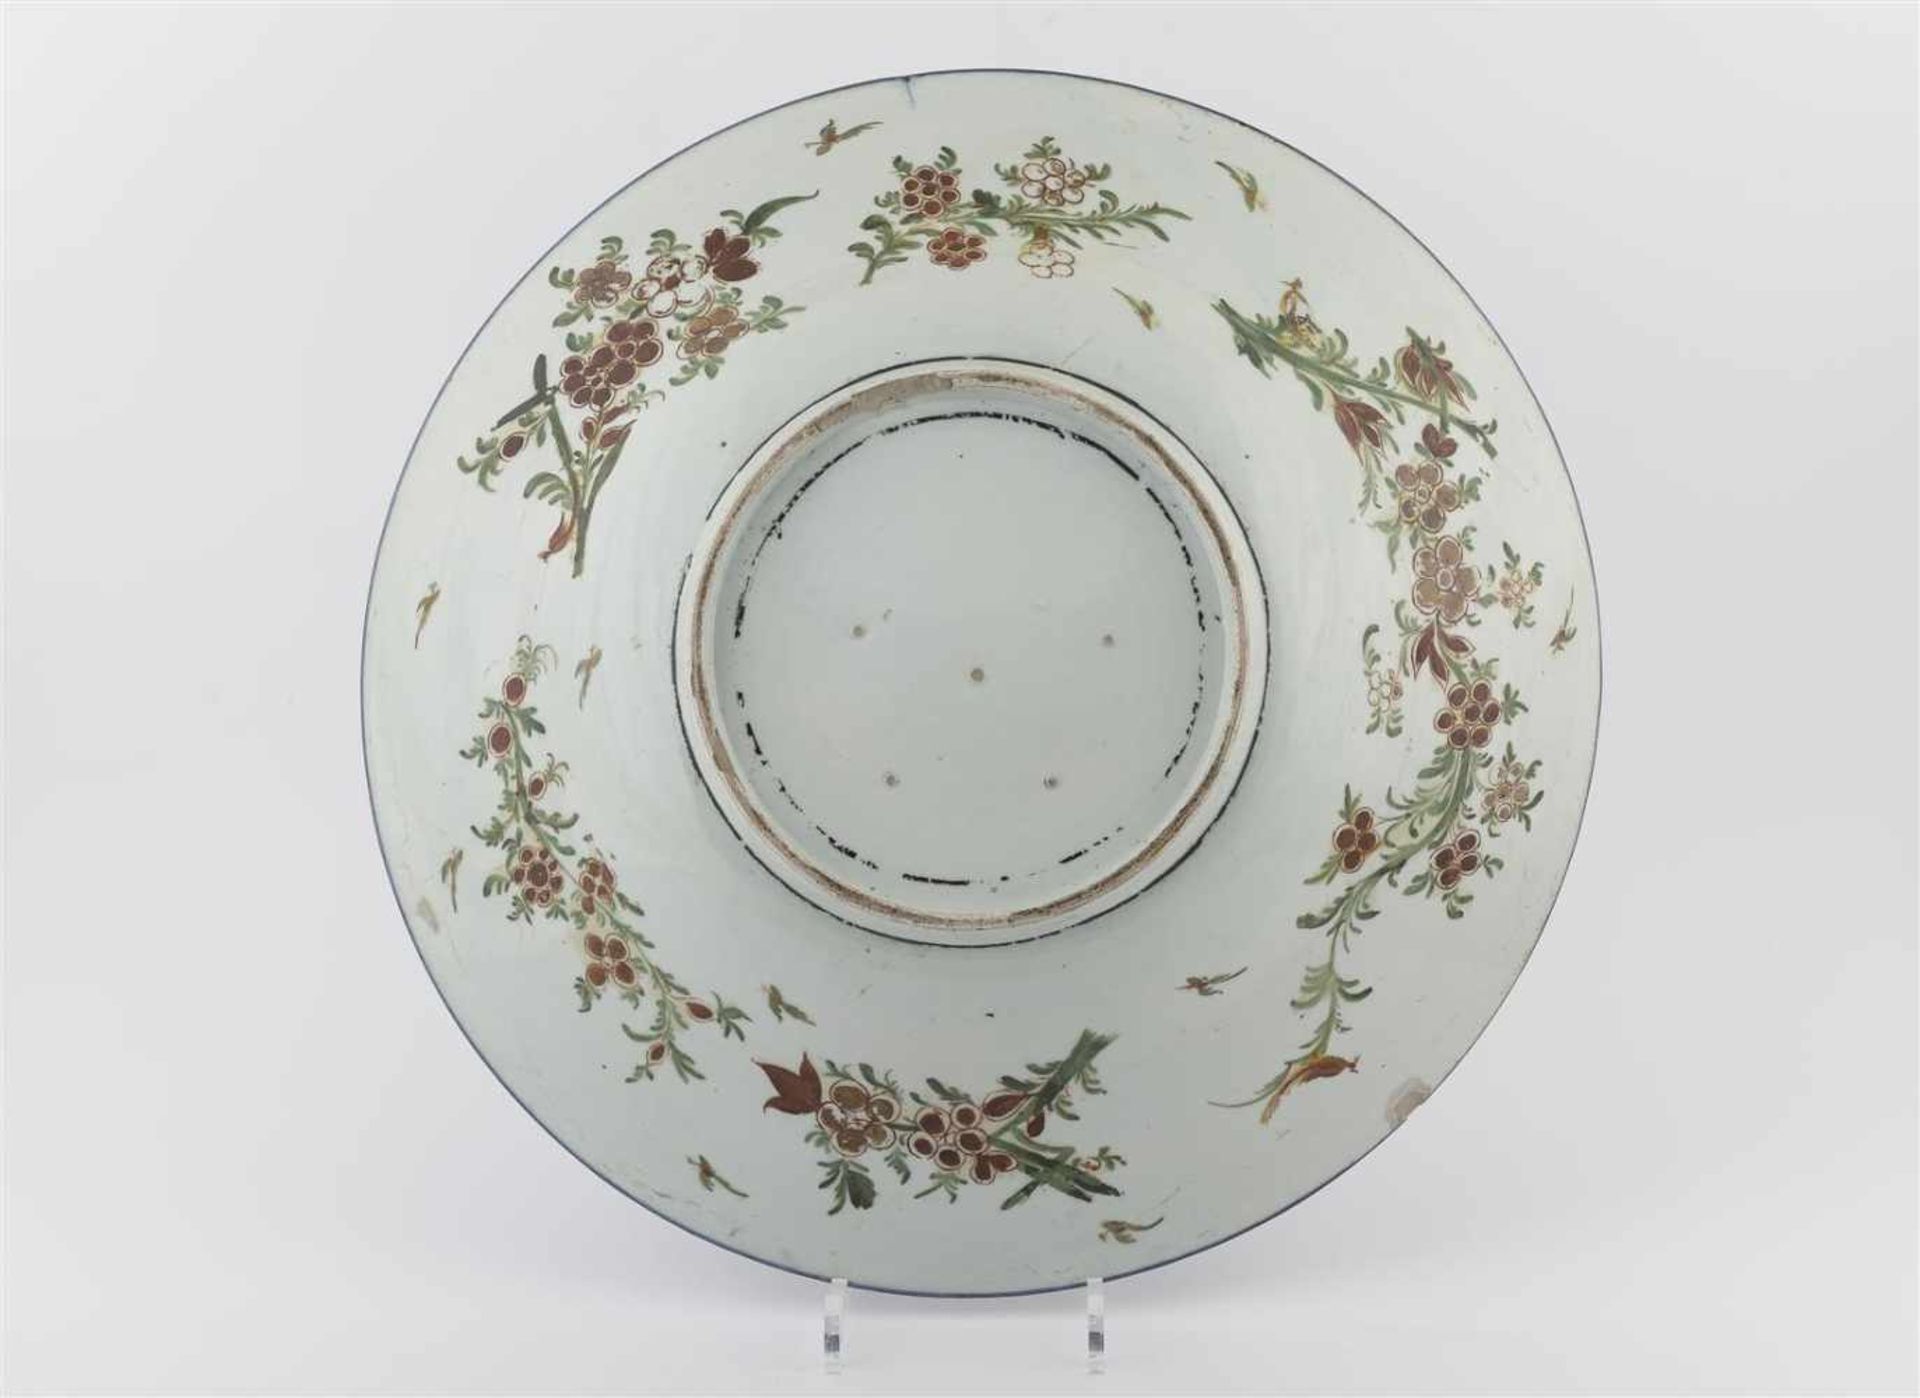 A large blue and white porcelain deep charger, decorated with flower vases and landscapes. Unmarked. - Image 3 of 3